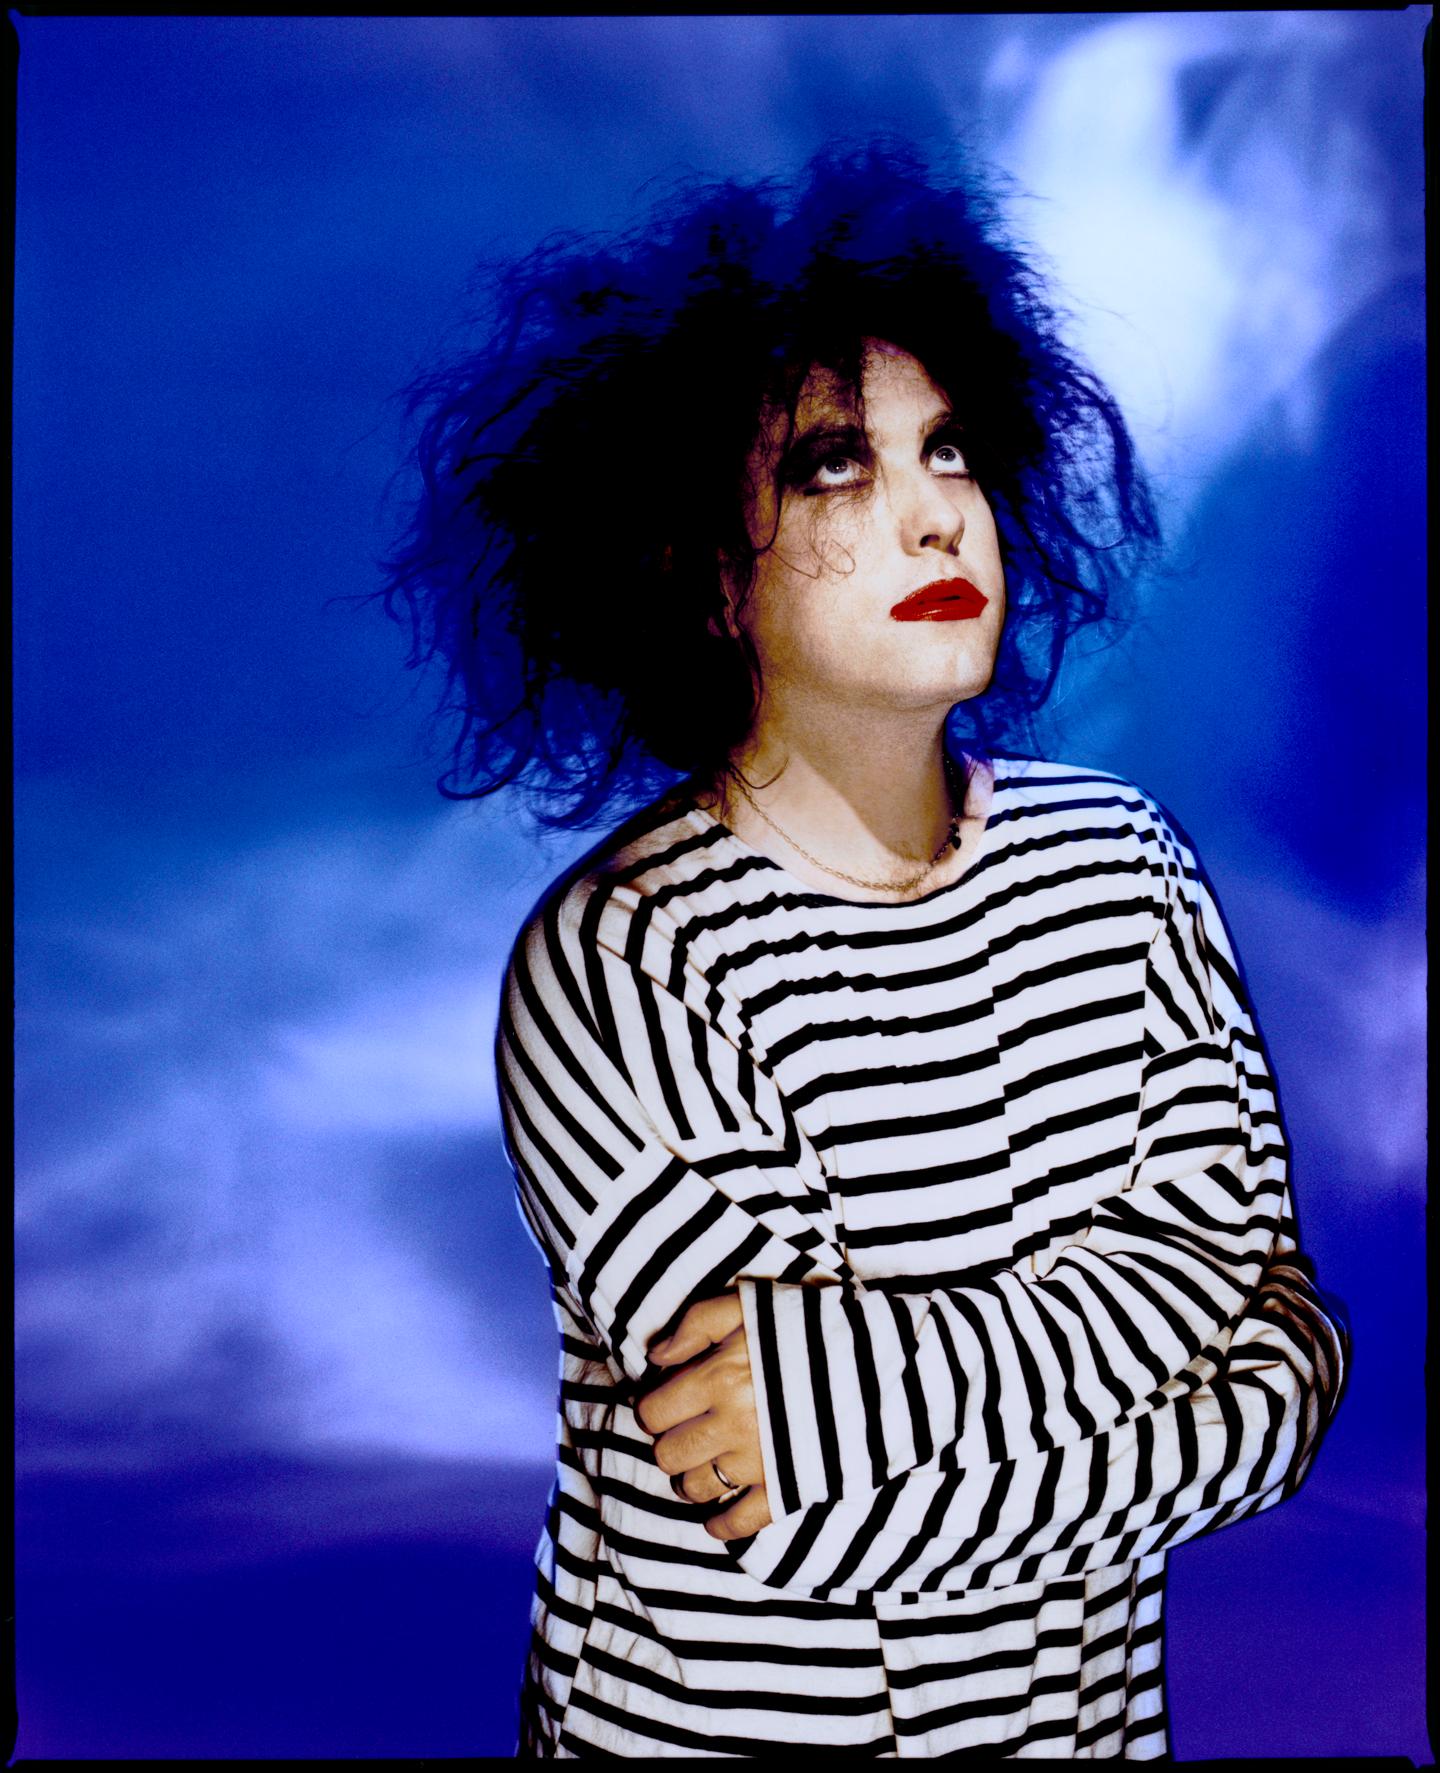 Robert Smith

1993

by Kevin Westenberg
Signed Limited Edition

Kevin Westenberg is famed for his creation of provocative and electrifying images of world-class musicians, artists and movie stars for over 25 years.

His technique of lighting, color